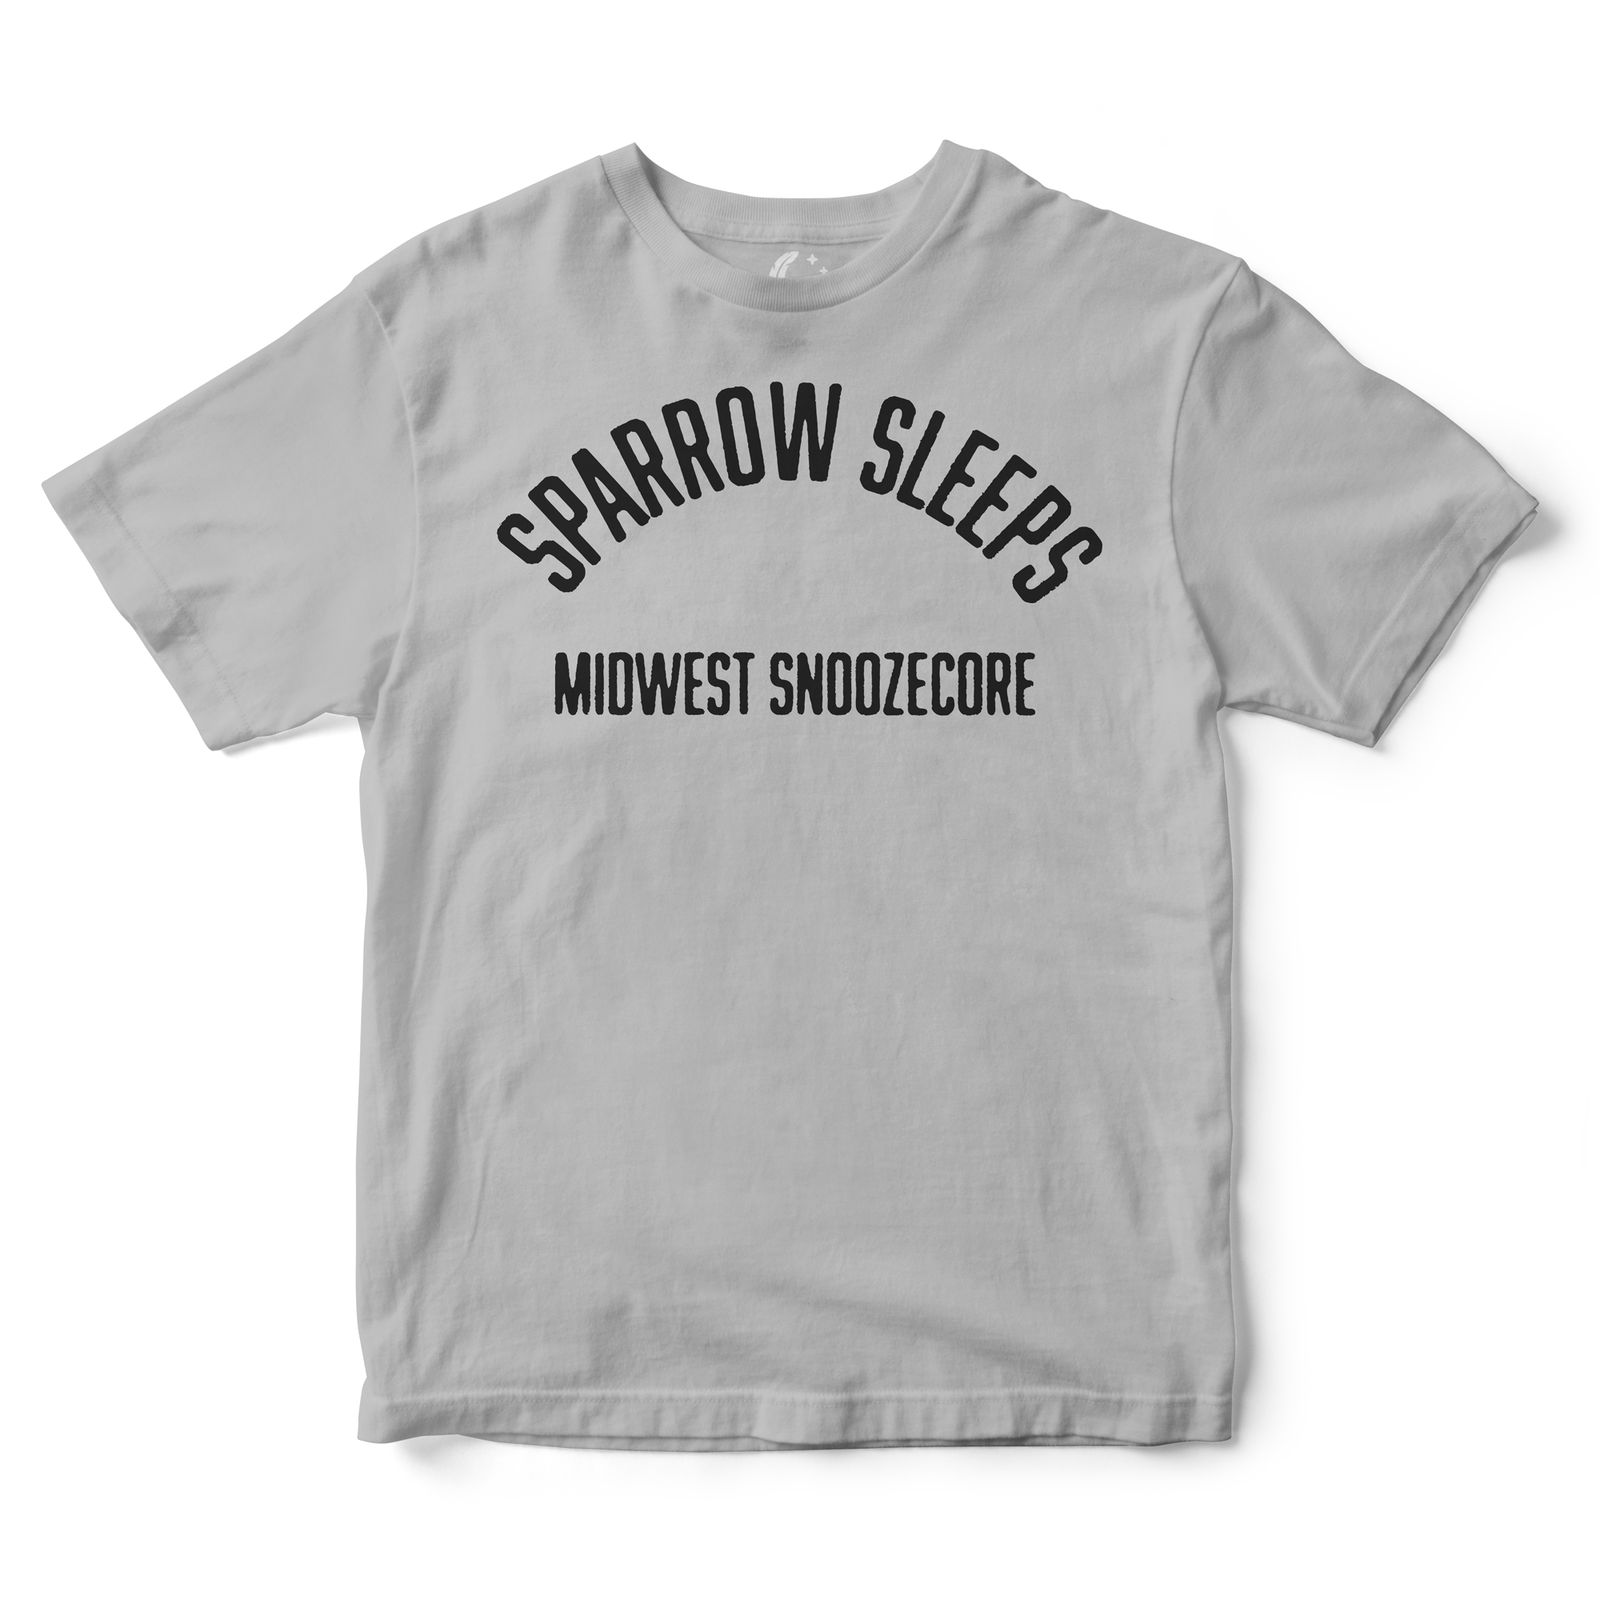 Midwest Snoozecore Adult T-Shirt (Gray)